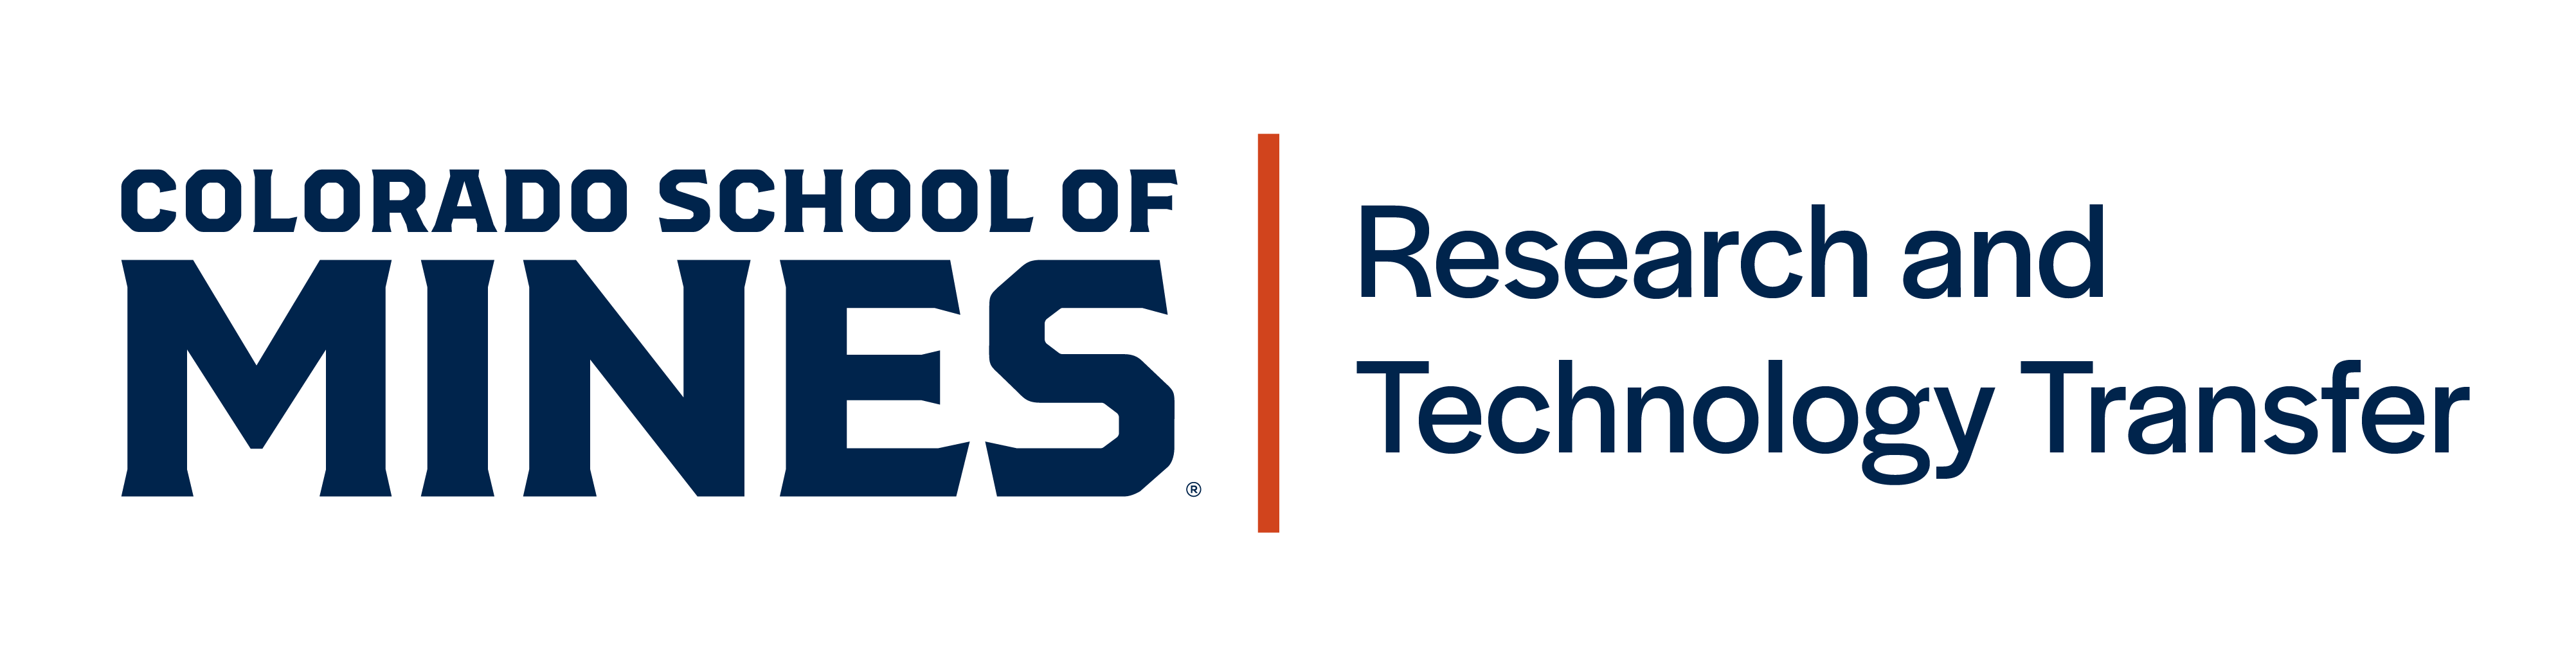 Mines-Research-Technology-Transfer-logo